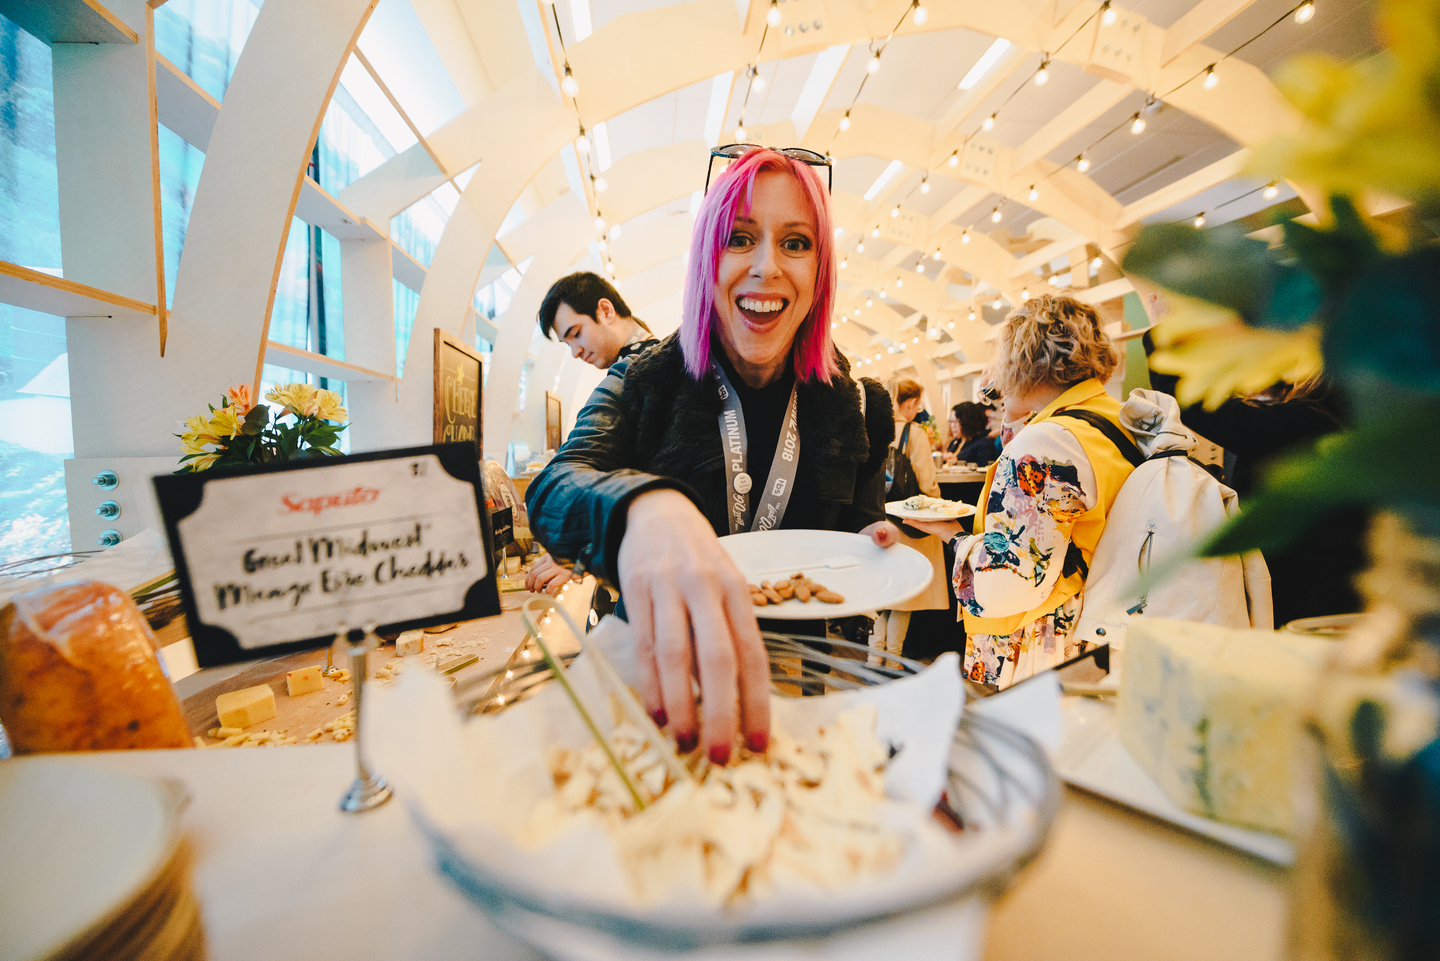 An attendee at The World’s Longest Cheeseboard (from Wisconsin, of course). Photo by Judy Won